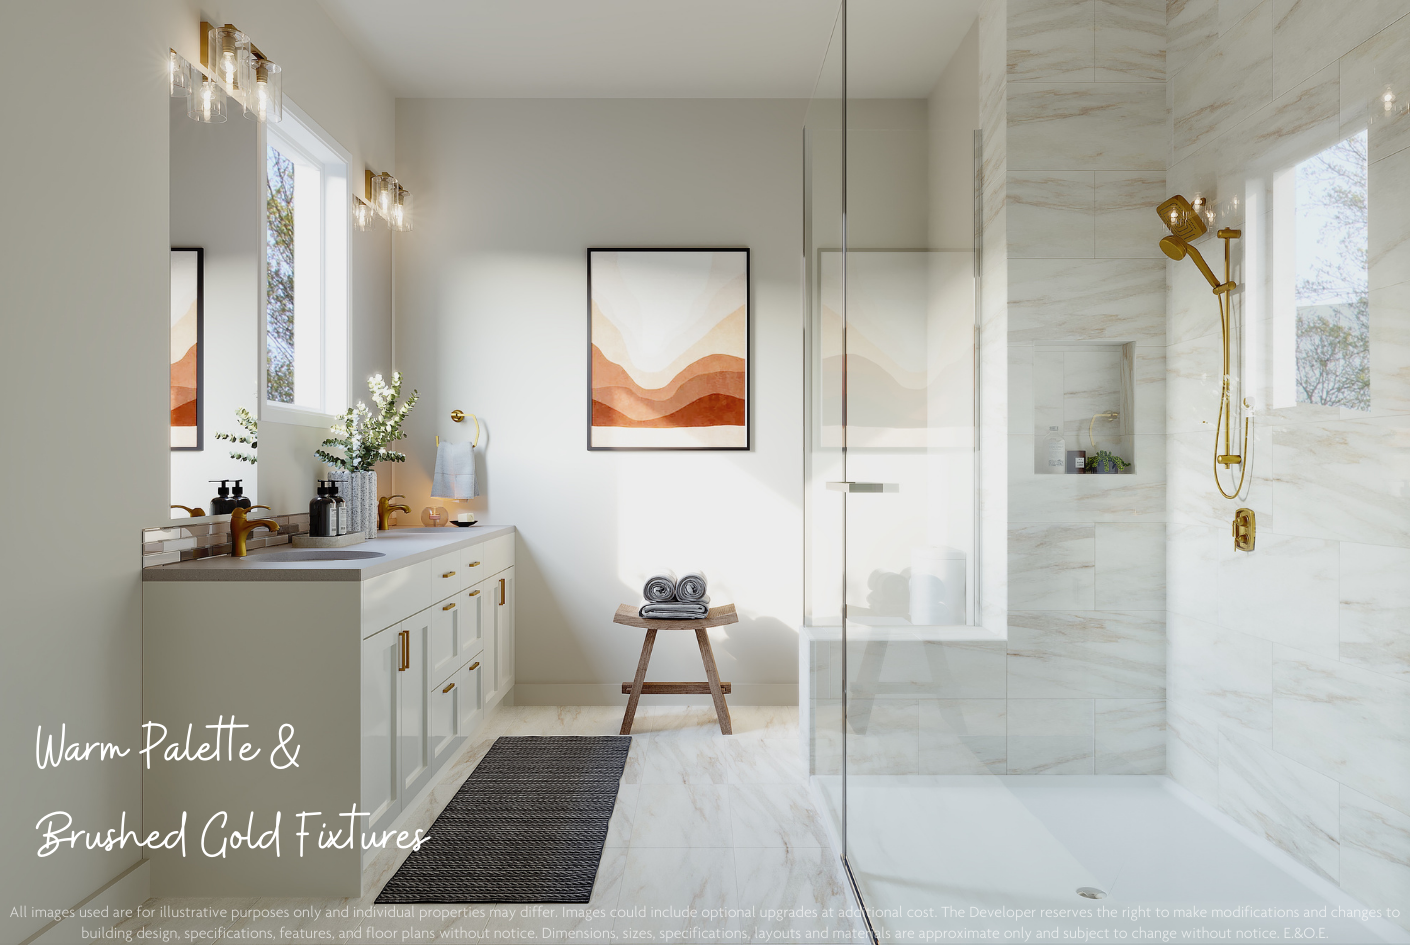 Lakeside Estates ensuite rendered in the warm palette